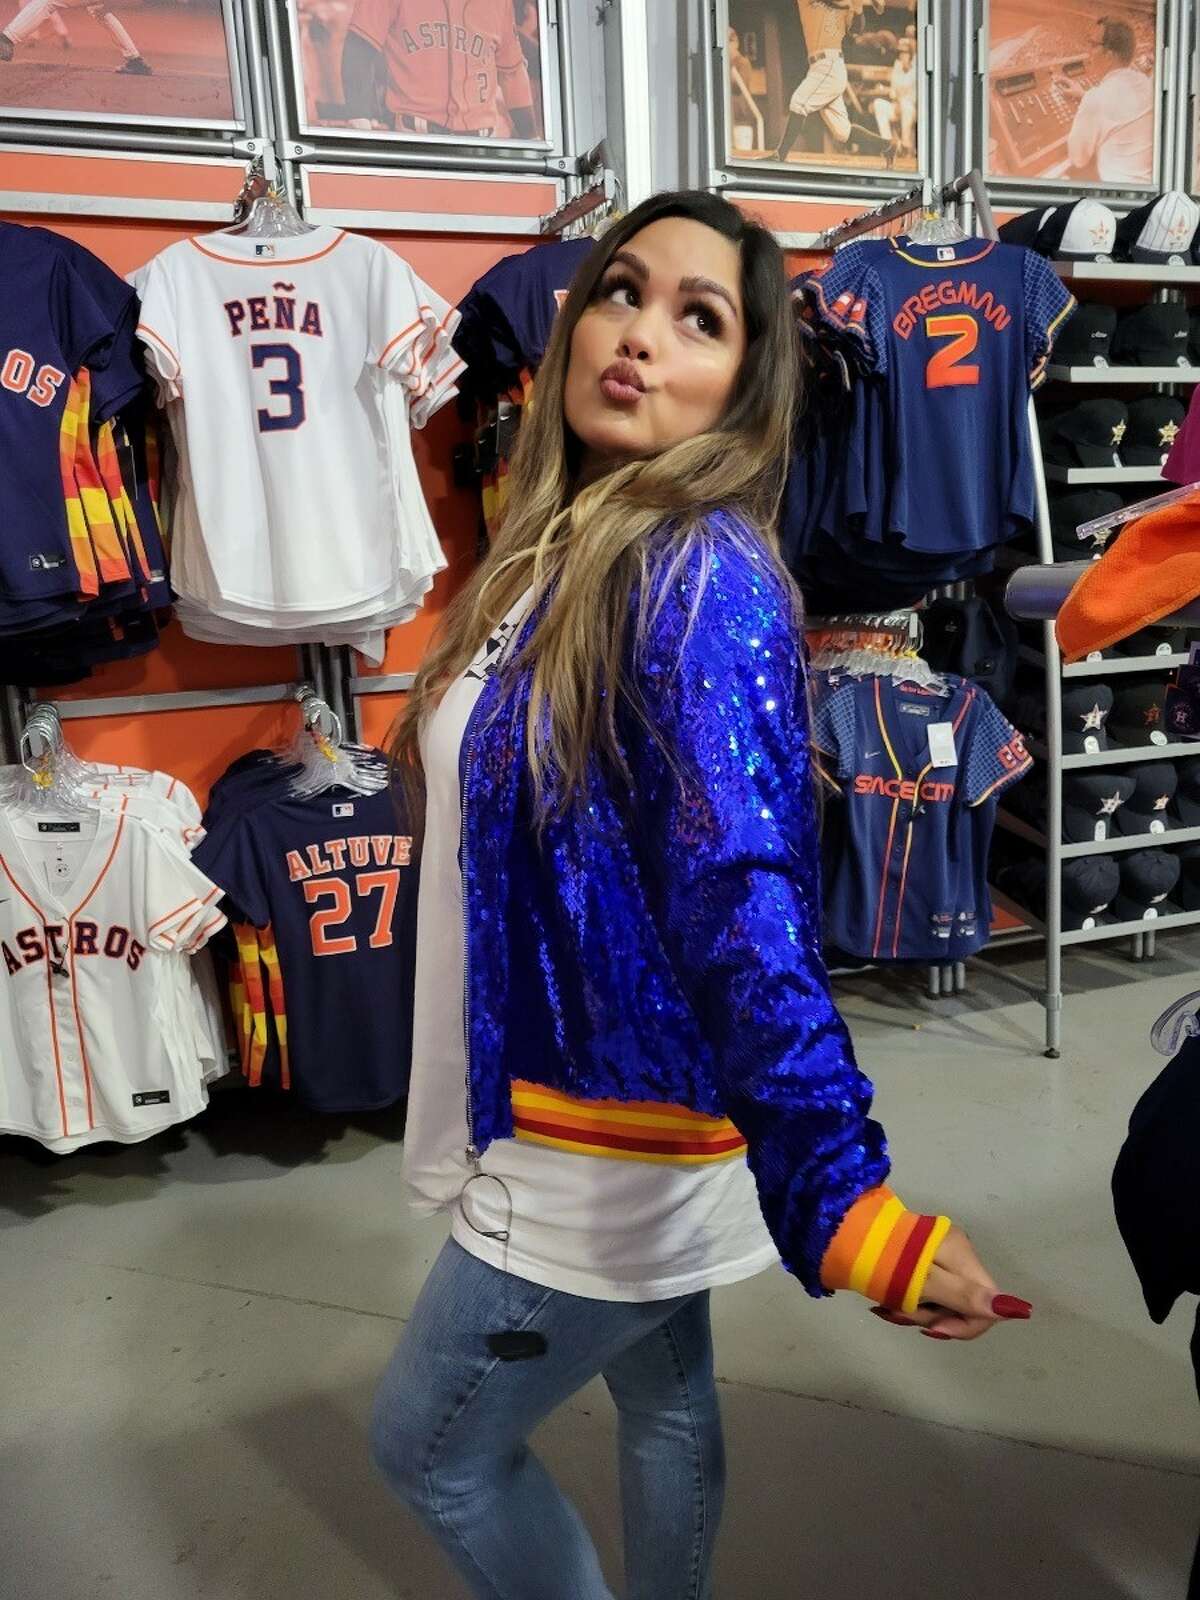 Official Ladies Houston Astros Jackets, Astros Ladies Pullovers